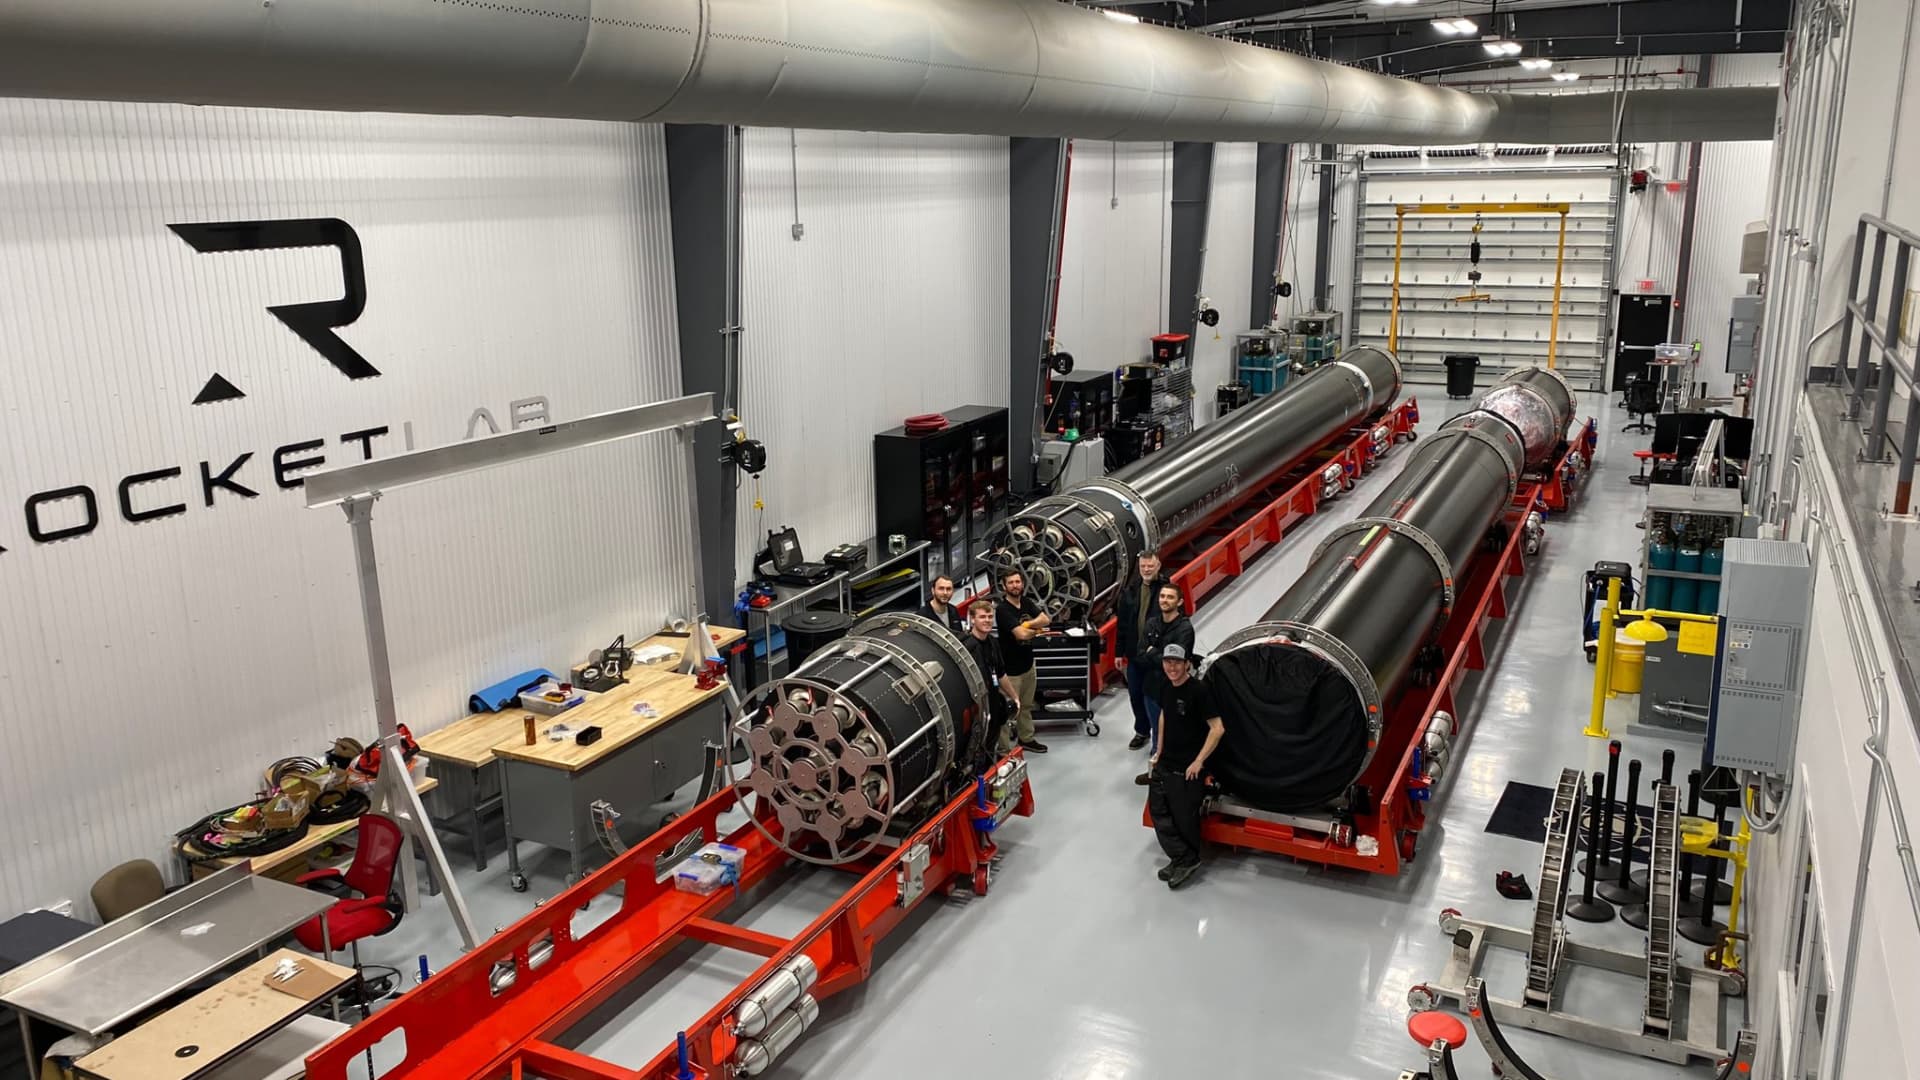 Rocket Lab revenue increases slightly, company adds NASA launch contract